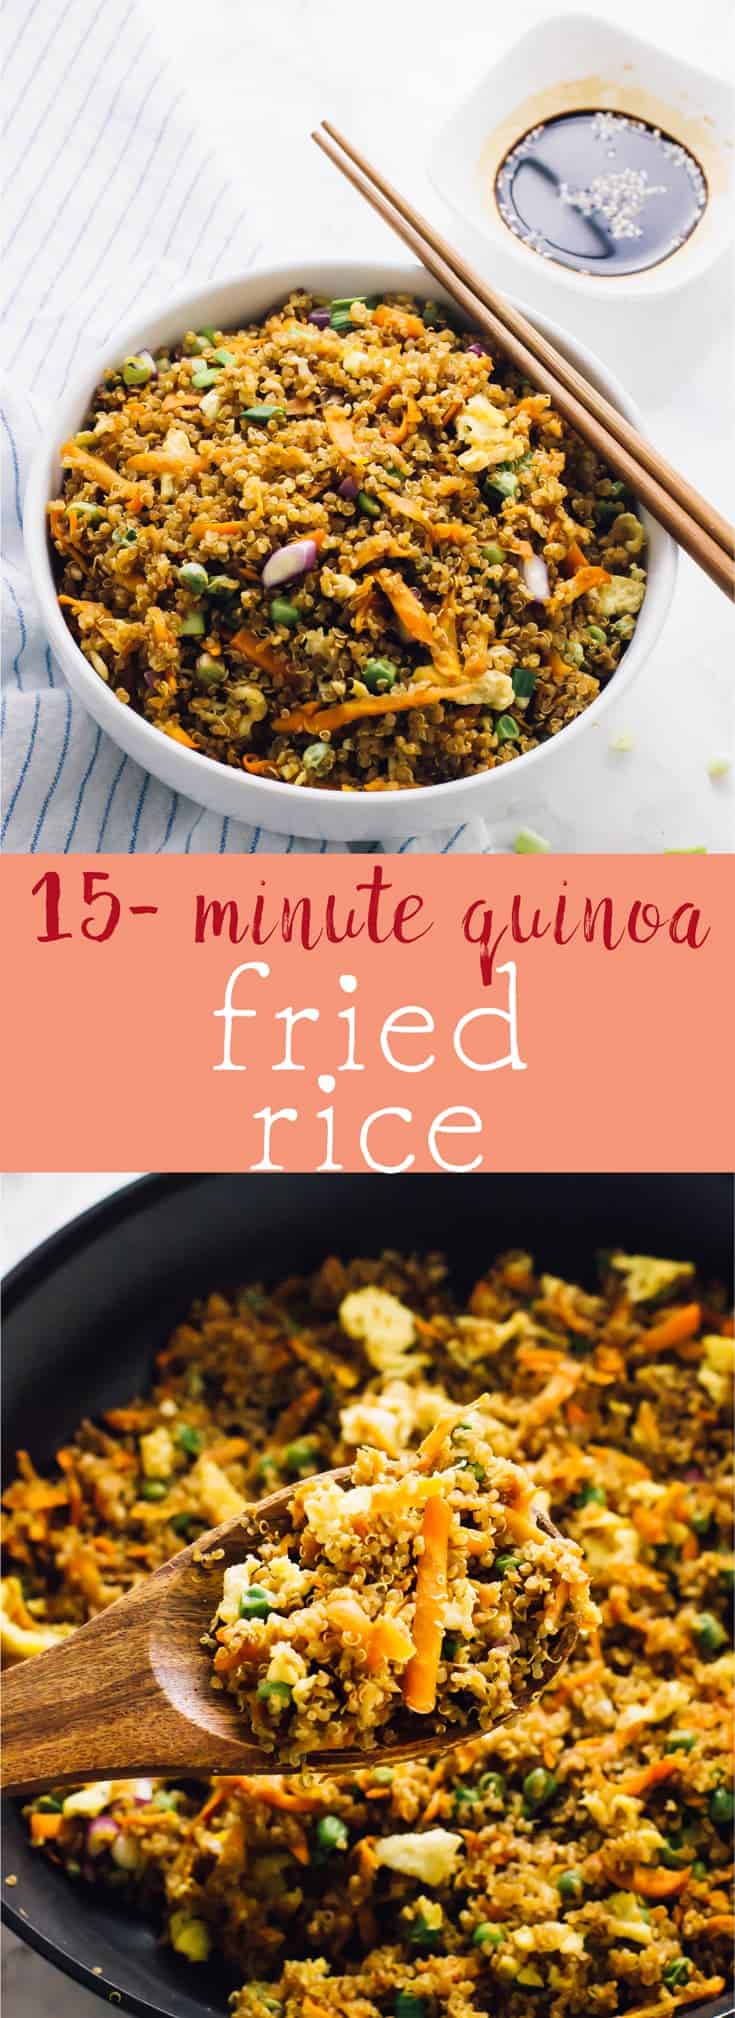 This Quinoa Fried Rice takes only 15 minutes to make! It tastes just like regular fried rice, except it's healthier, loaded with much more nutrients and foolproof! via https://jessicainthekitchen.com